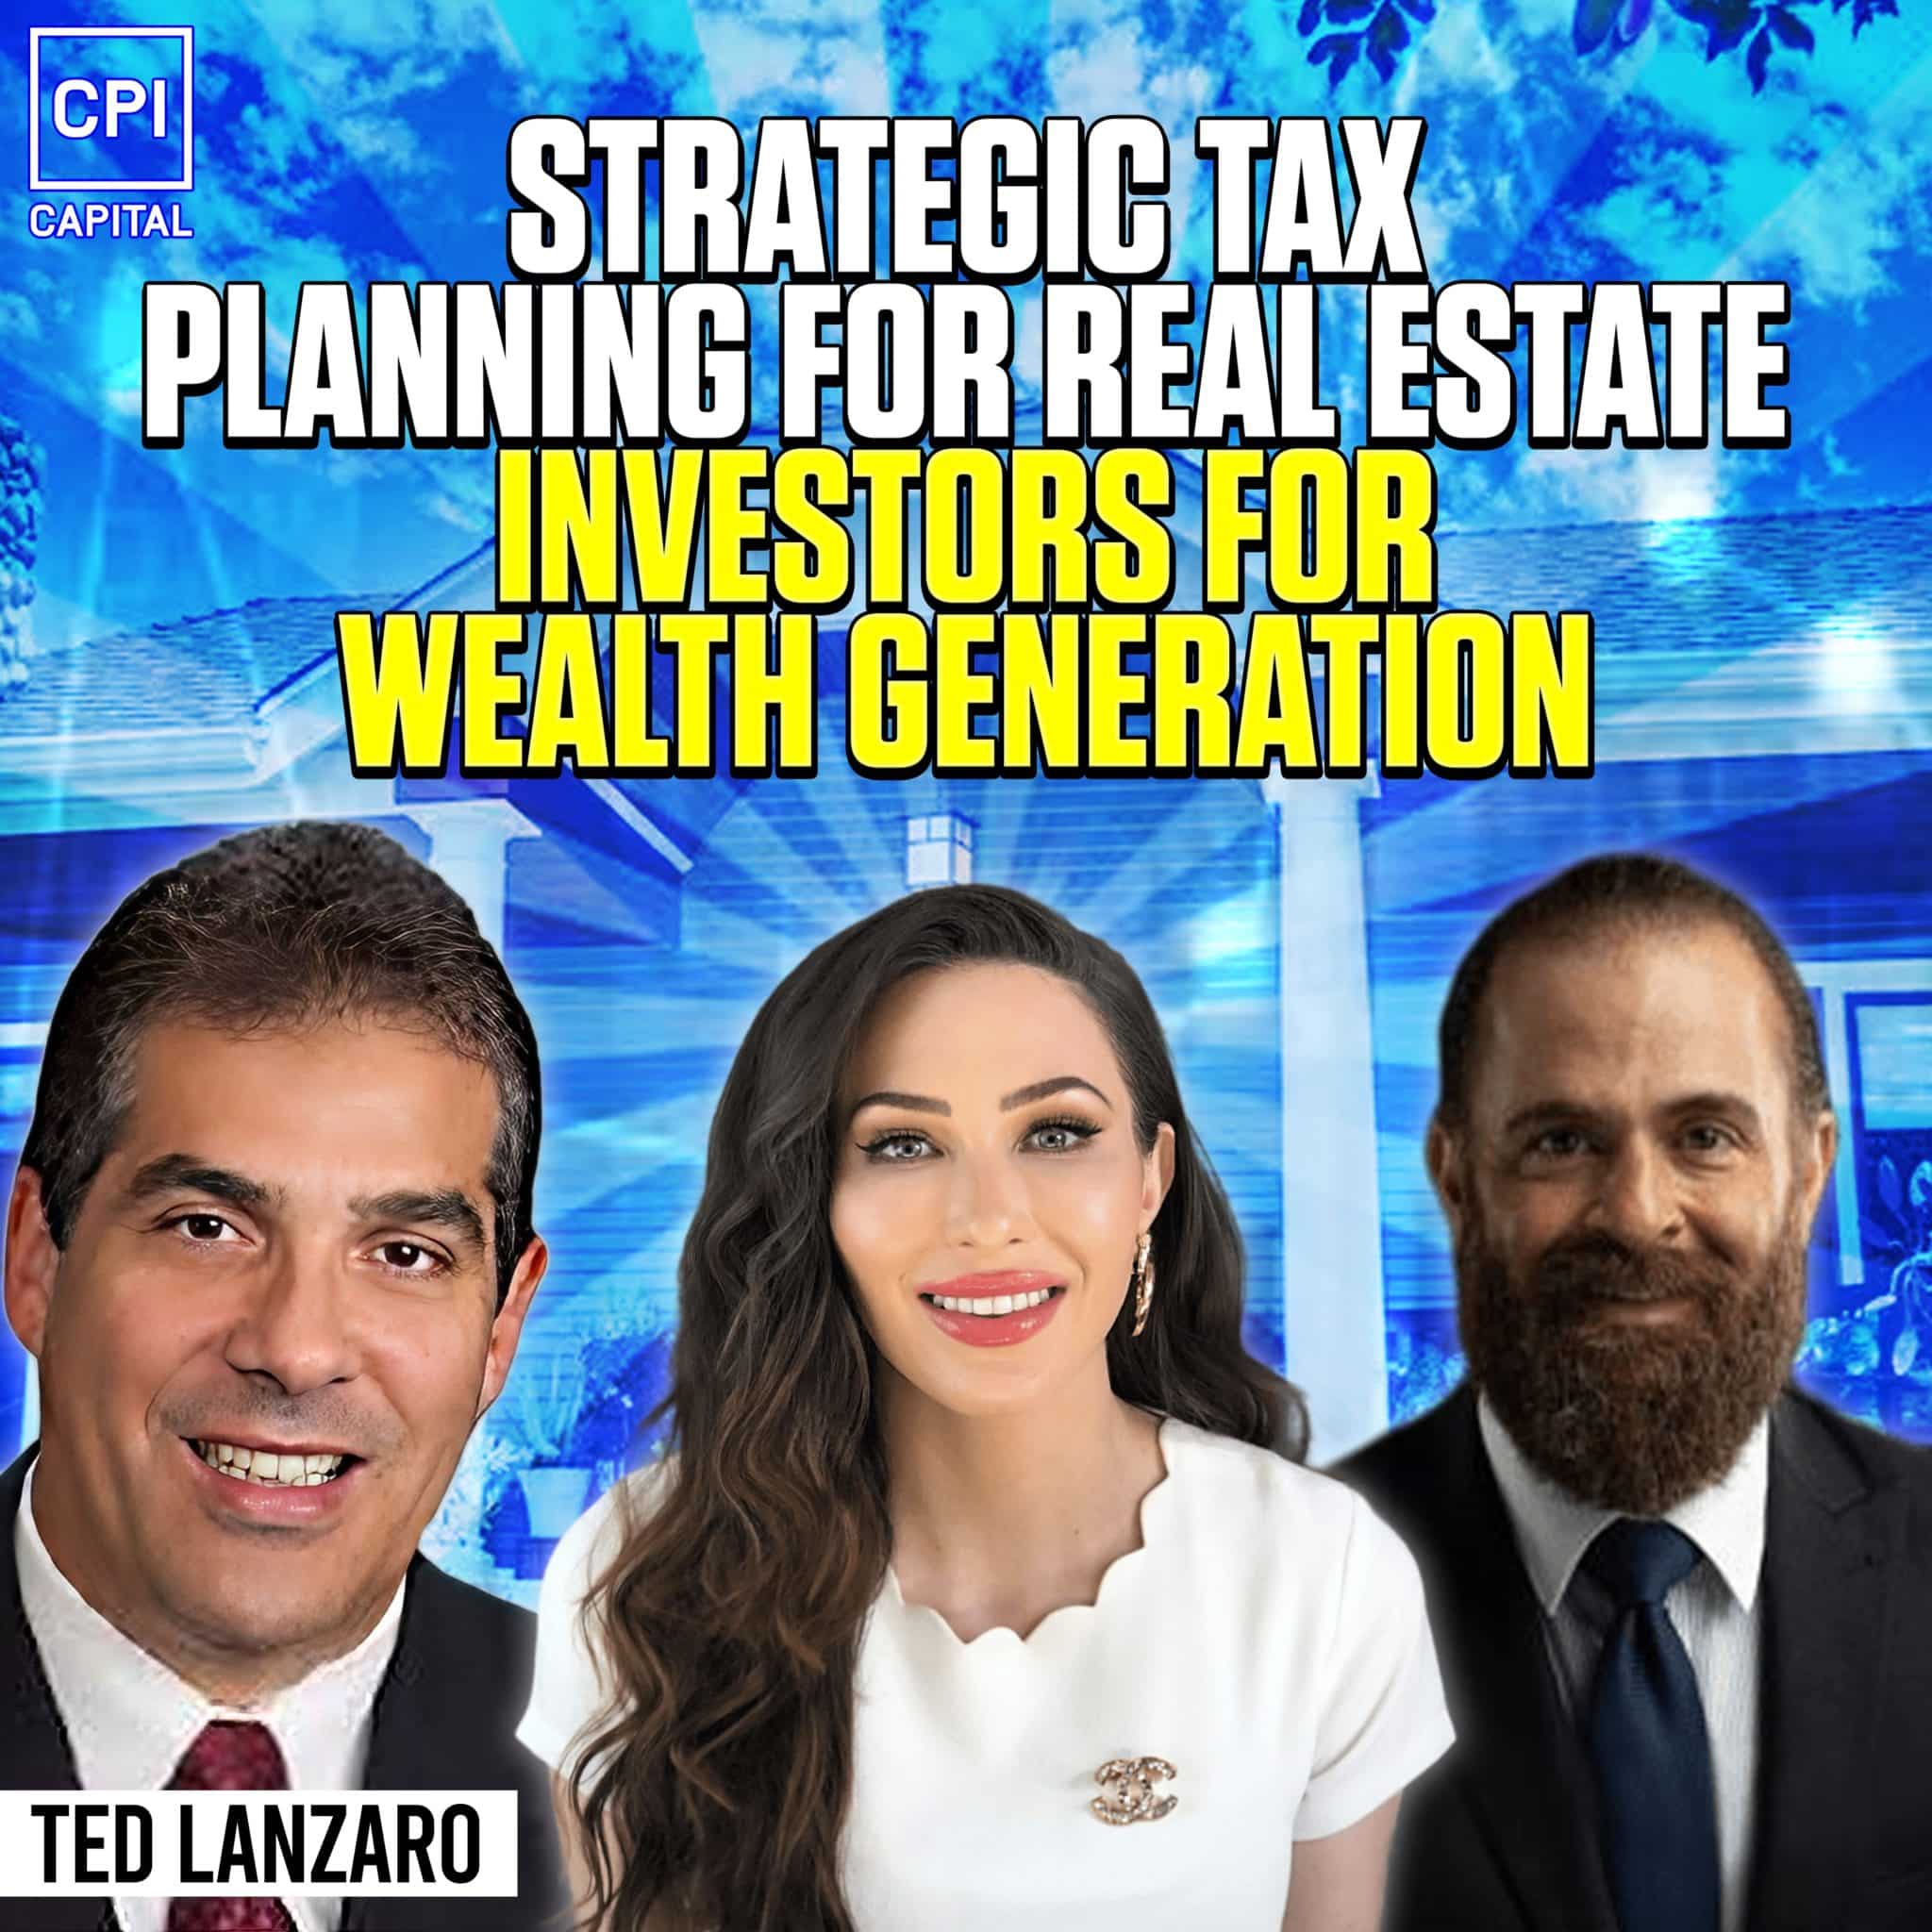 Strategic Tax Planning For Real Estate Investors For Wealth Generation – Ted Lanzaro